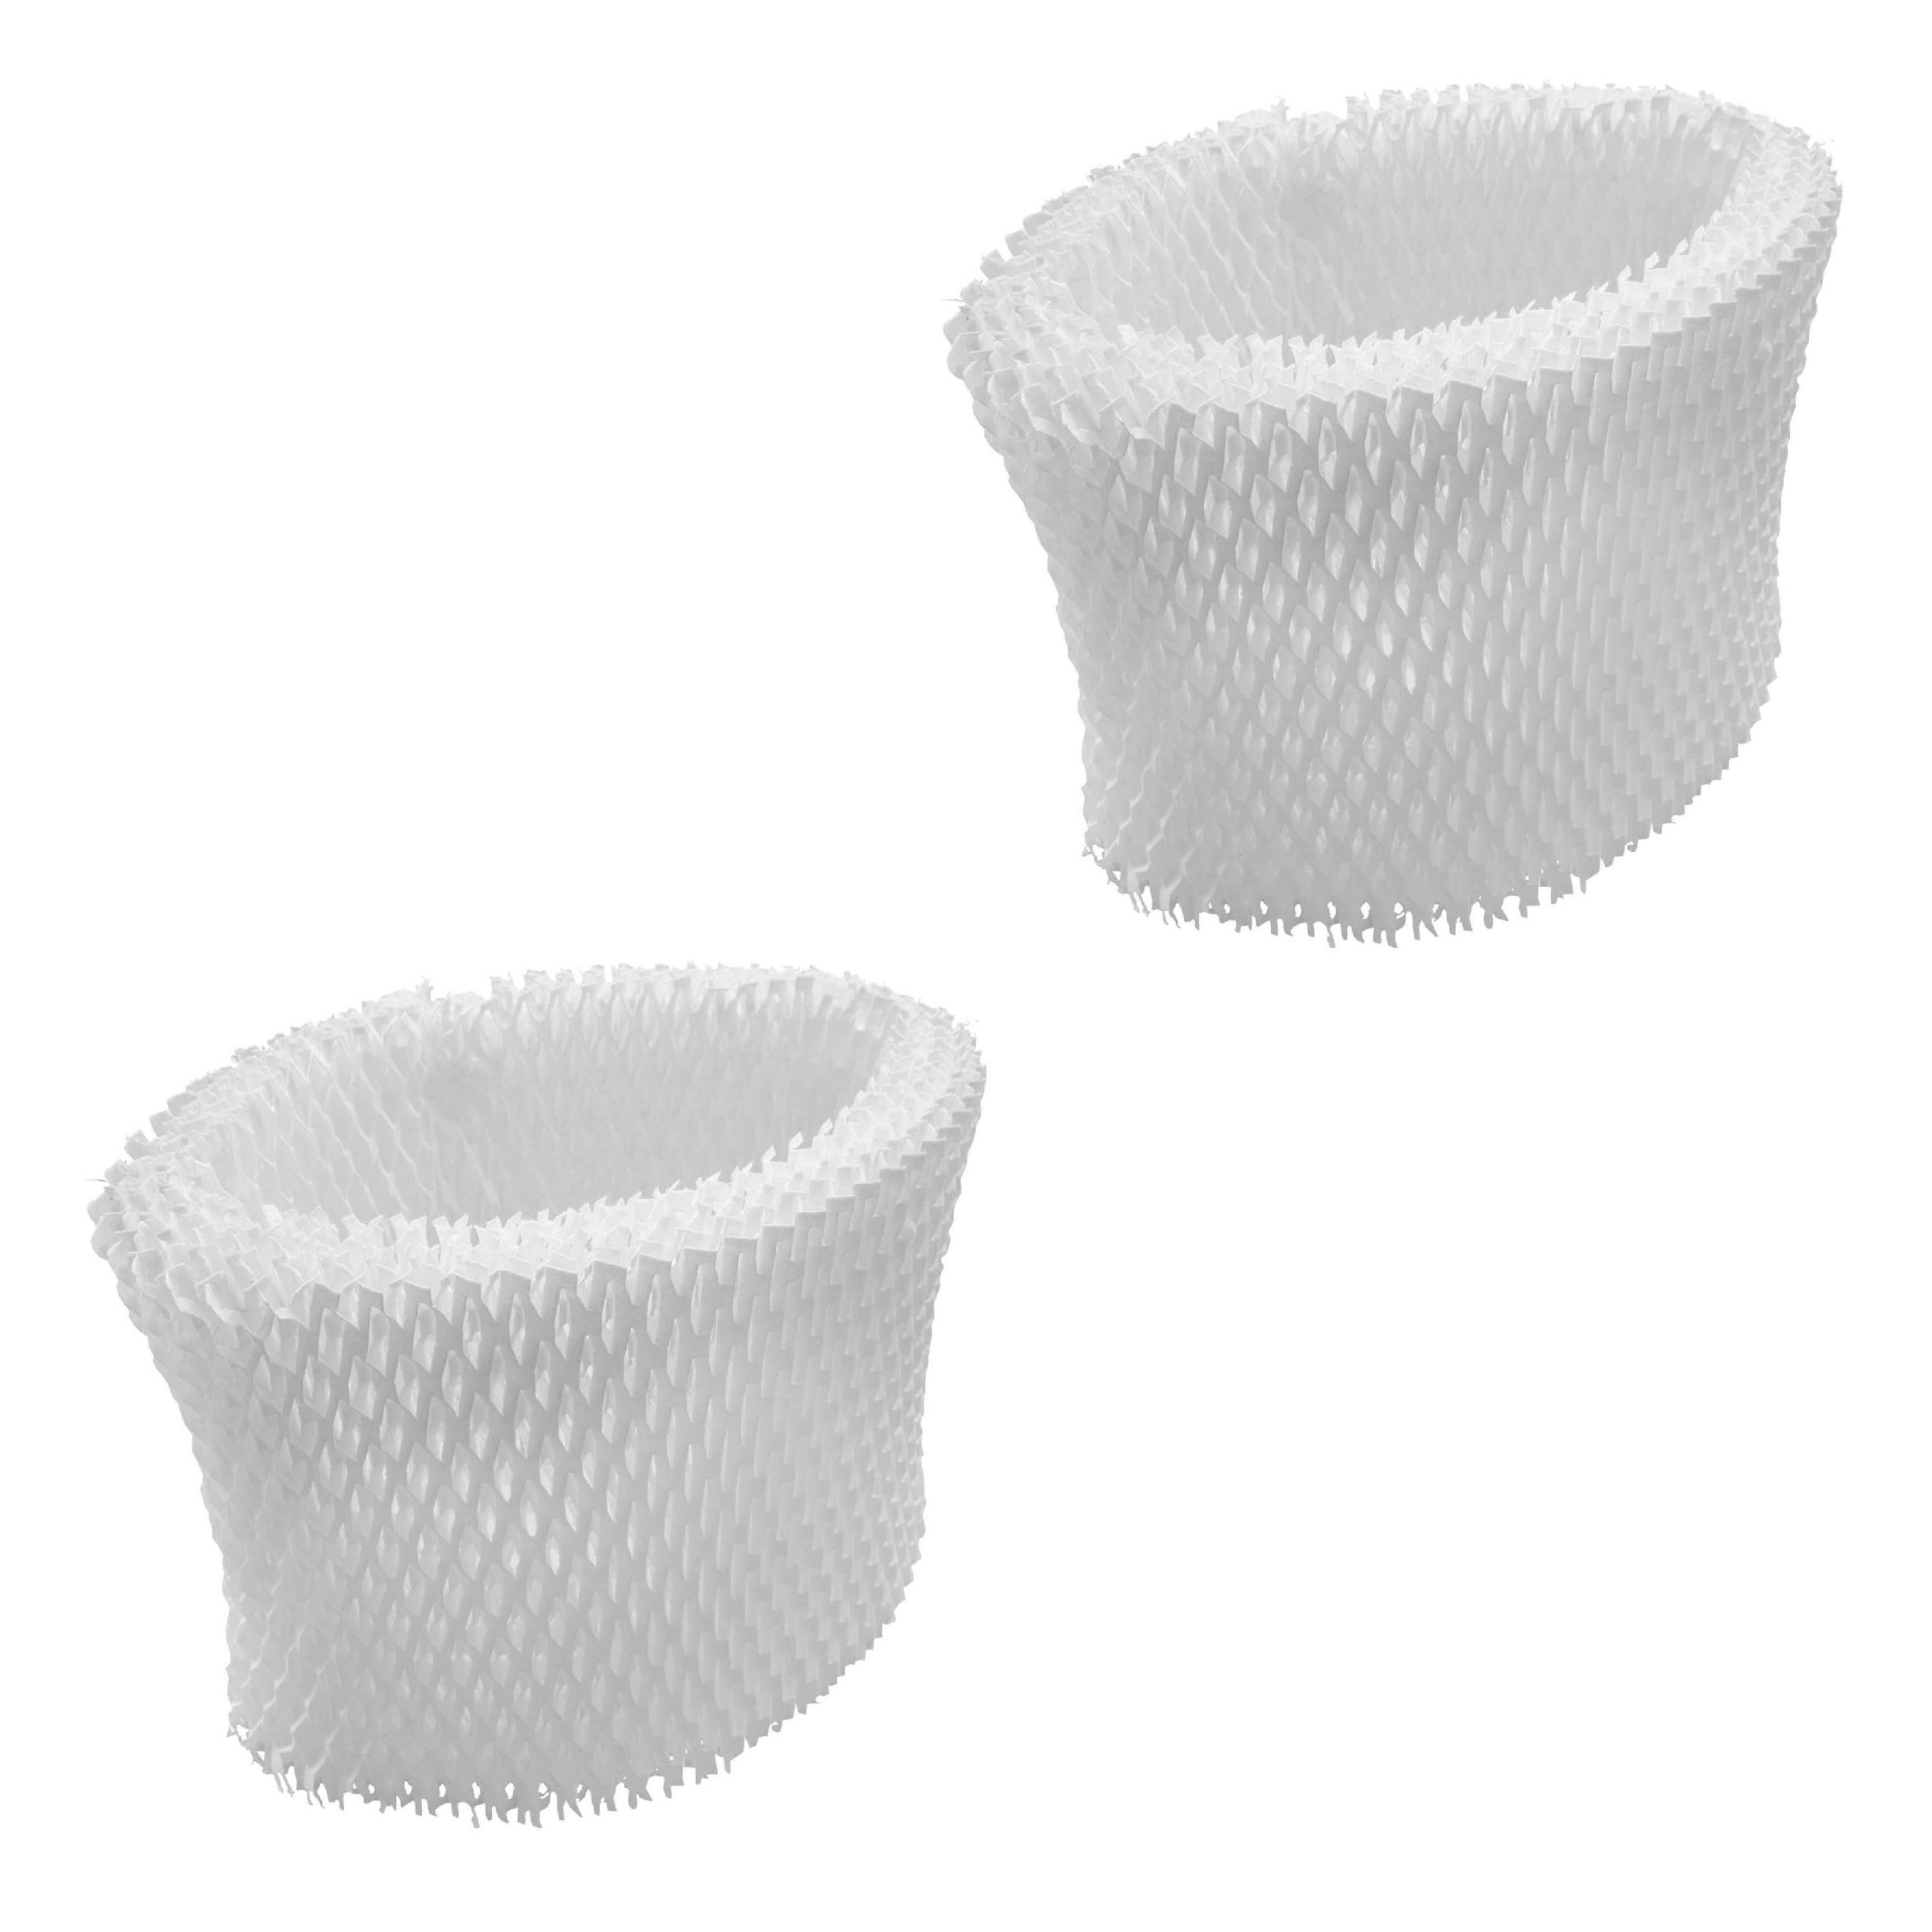 2x Filter replaces Philips HU4102/01, FY2401/10 for Humidifier - paper